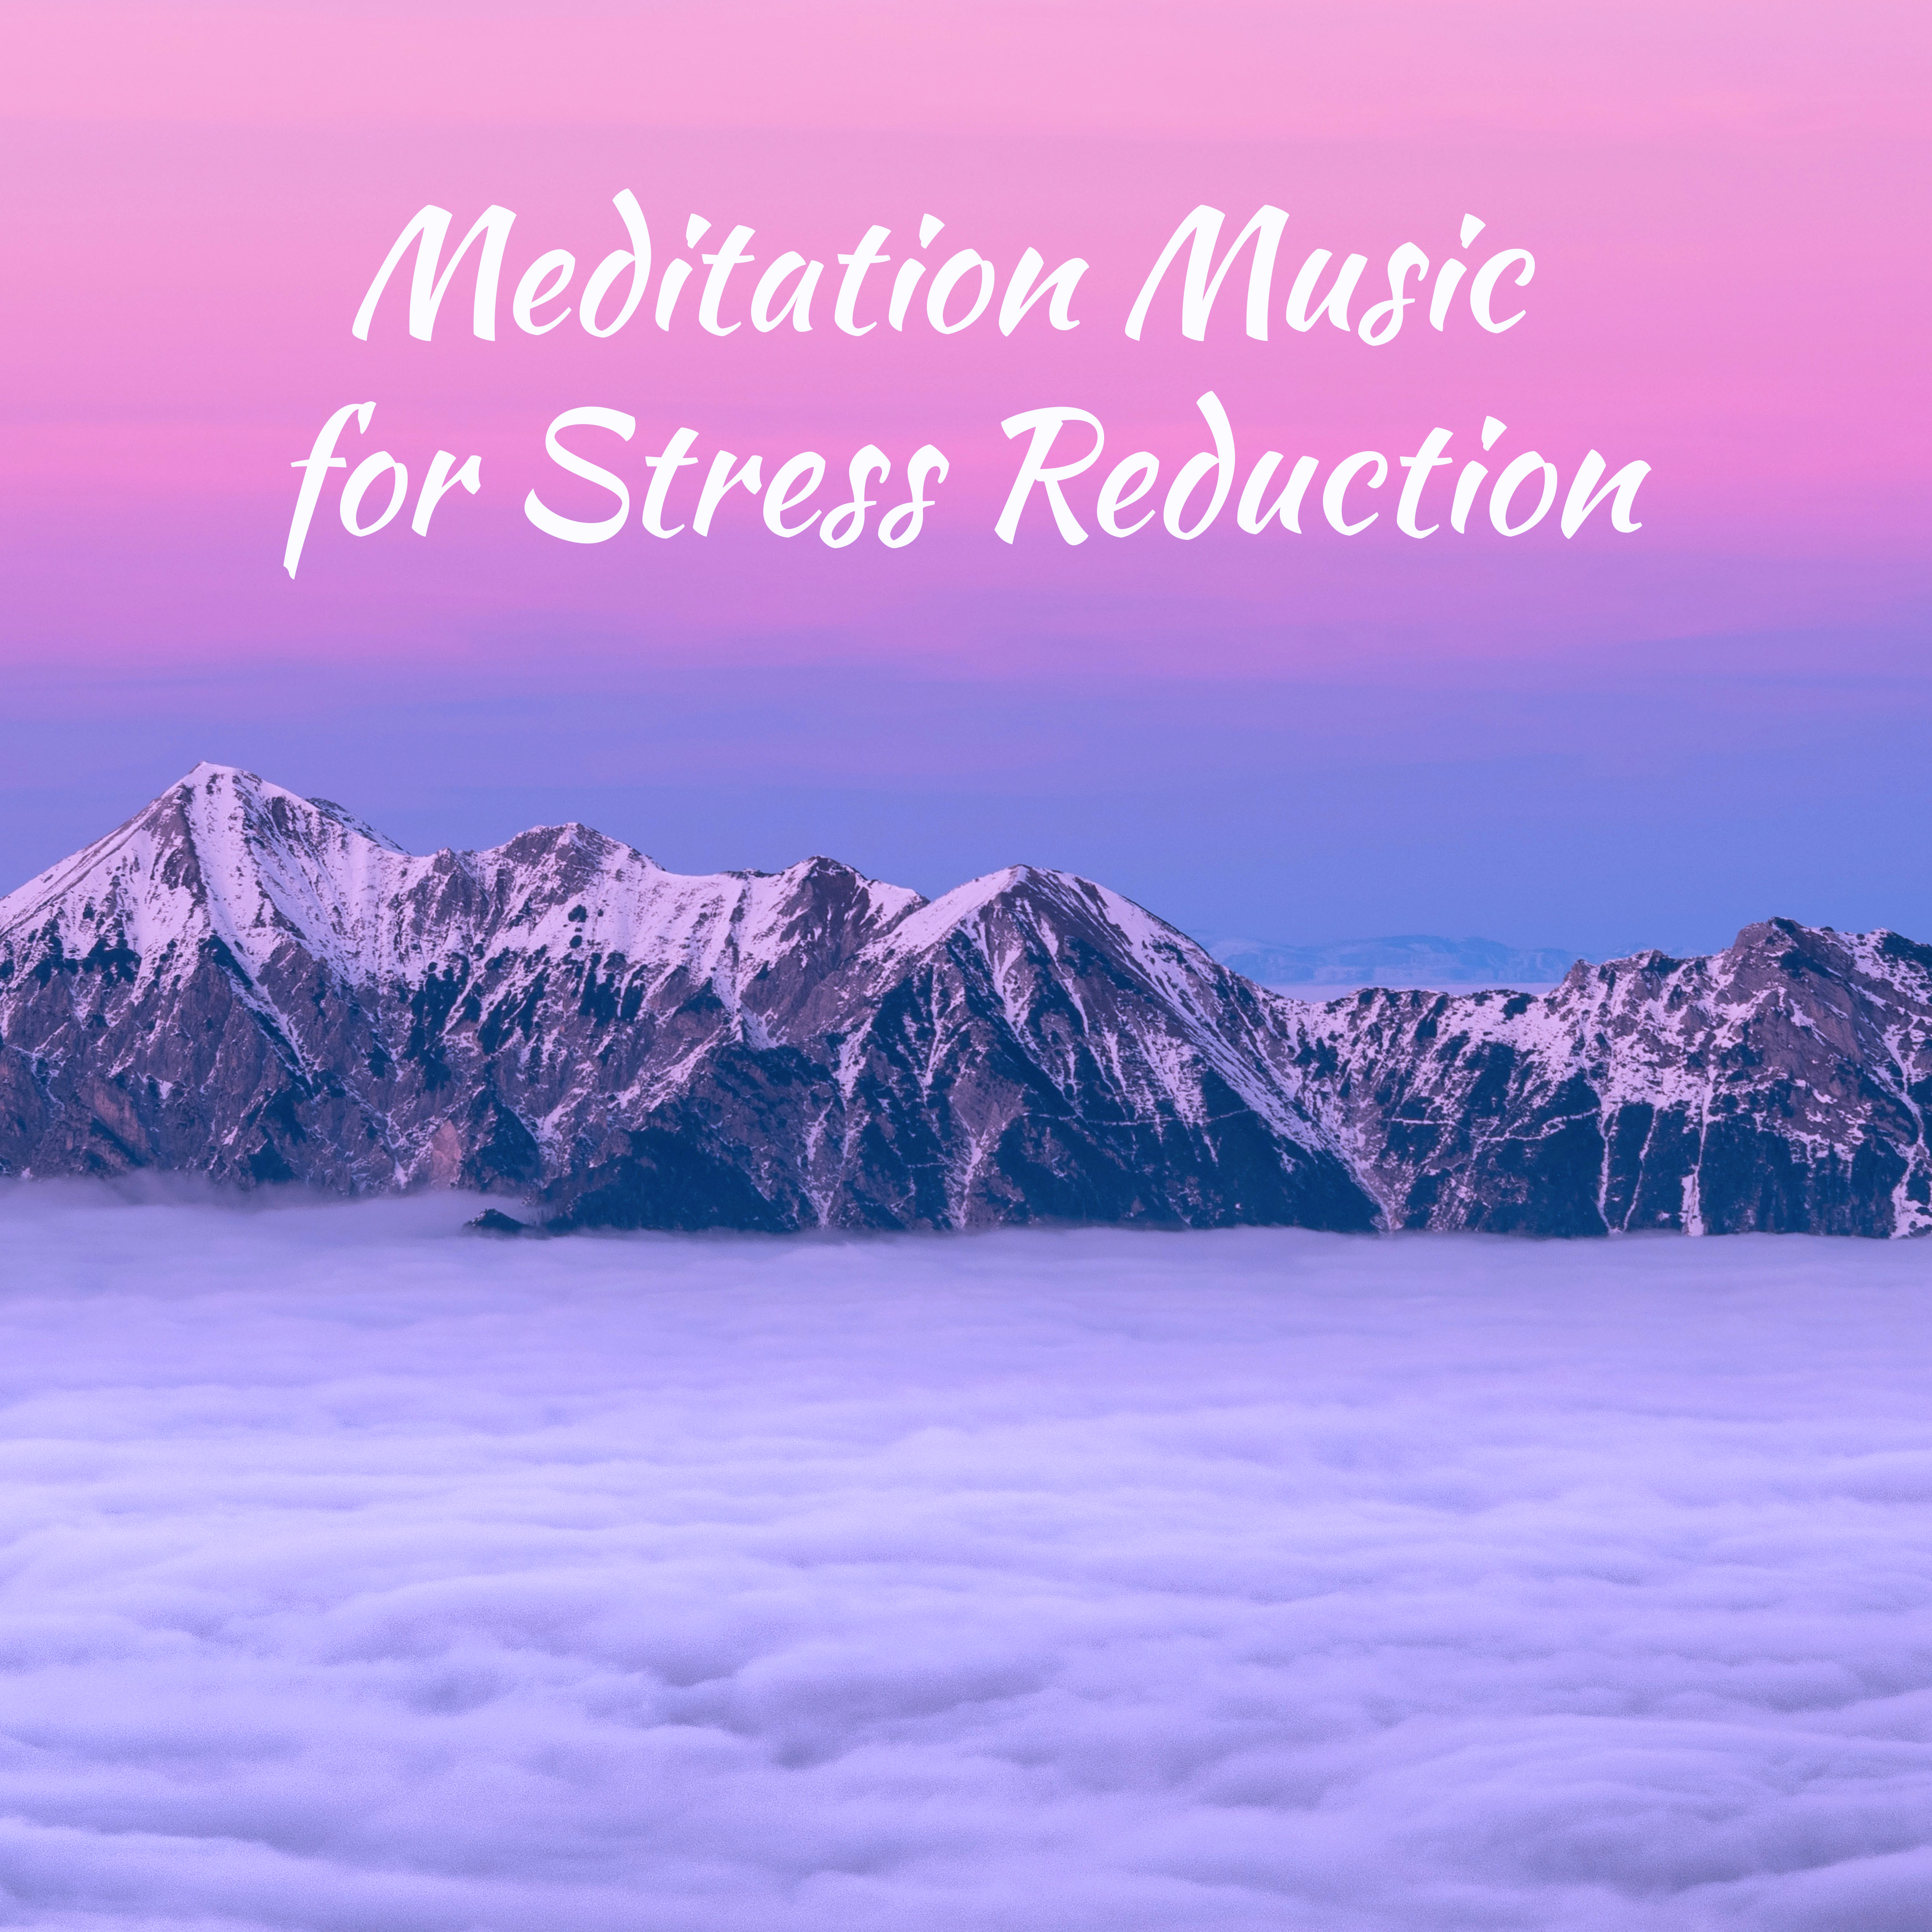 Meditation Music for Stress Reduction